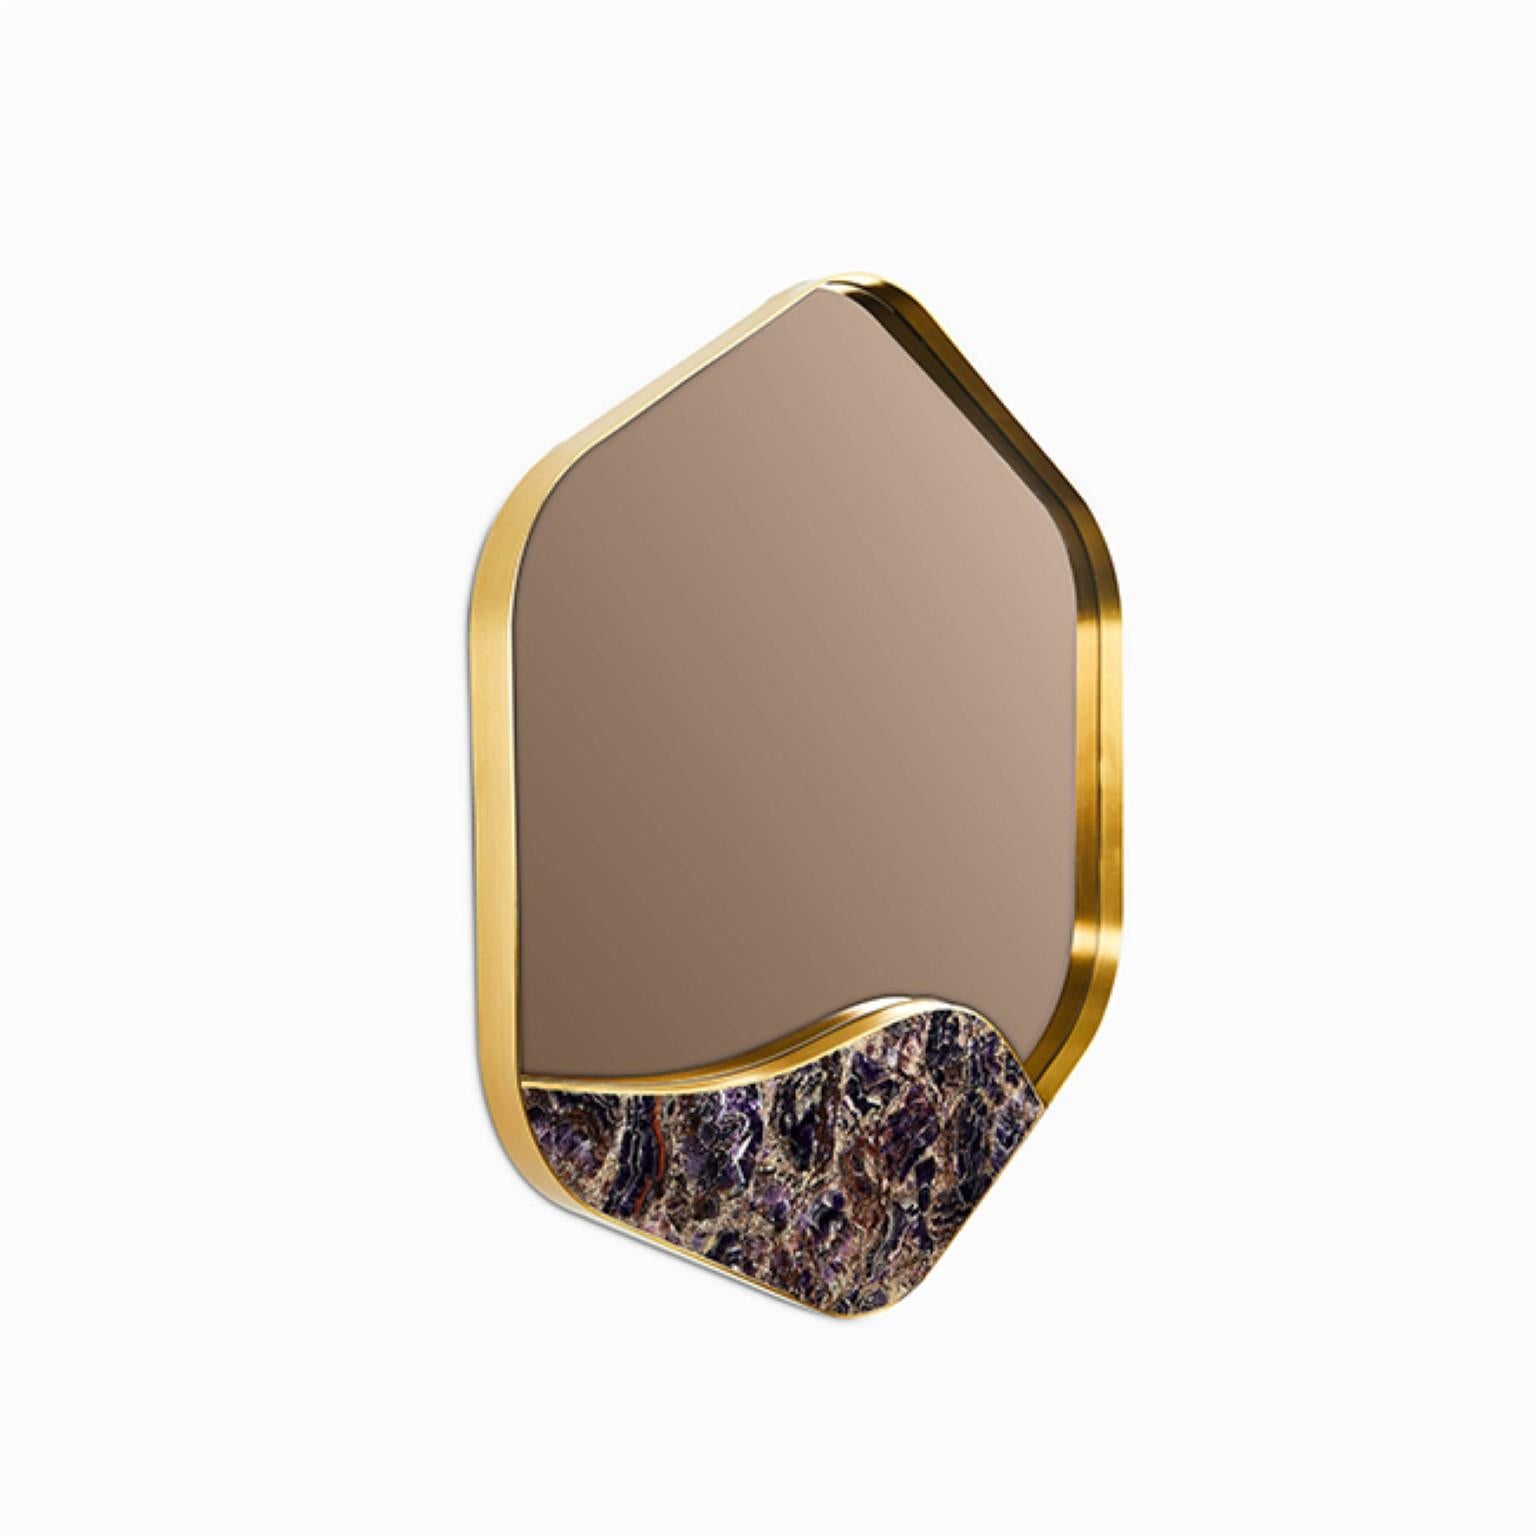 Aras mirror by Marble Balloon
Dimensions: W 83 x D 5 x H 76 cm
Materials: Steel, Marble

Inspired by the flow of Aras River, it combines 100% brass frame with semi-precious stone details. Semi-precious stones are available in either green onyx